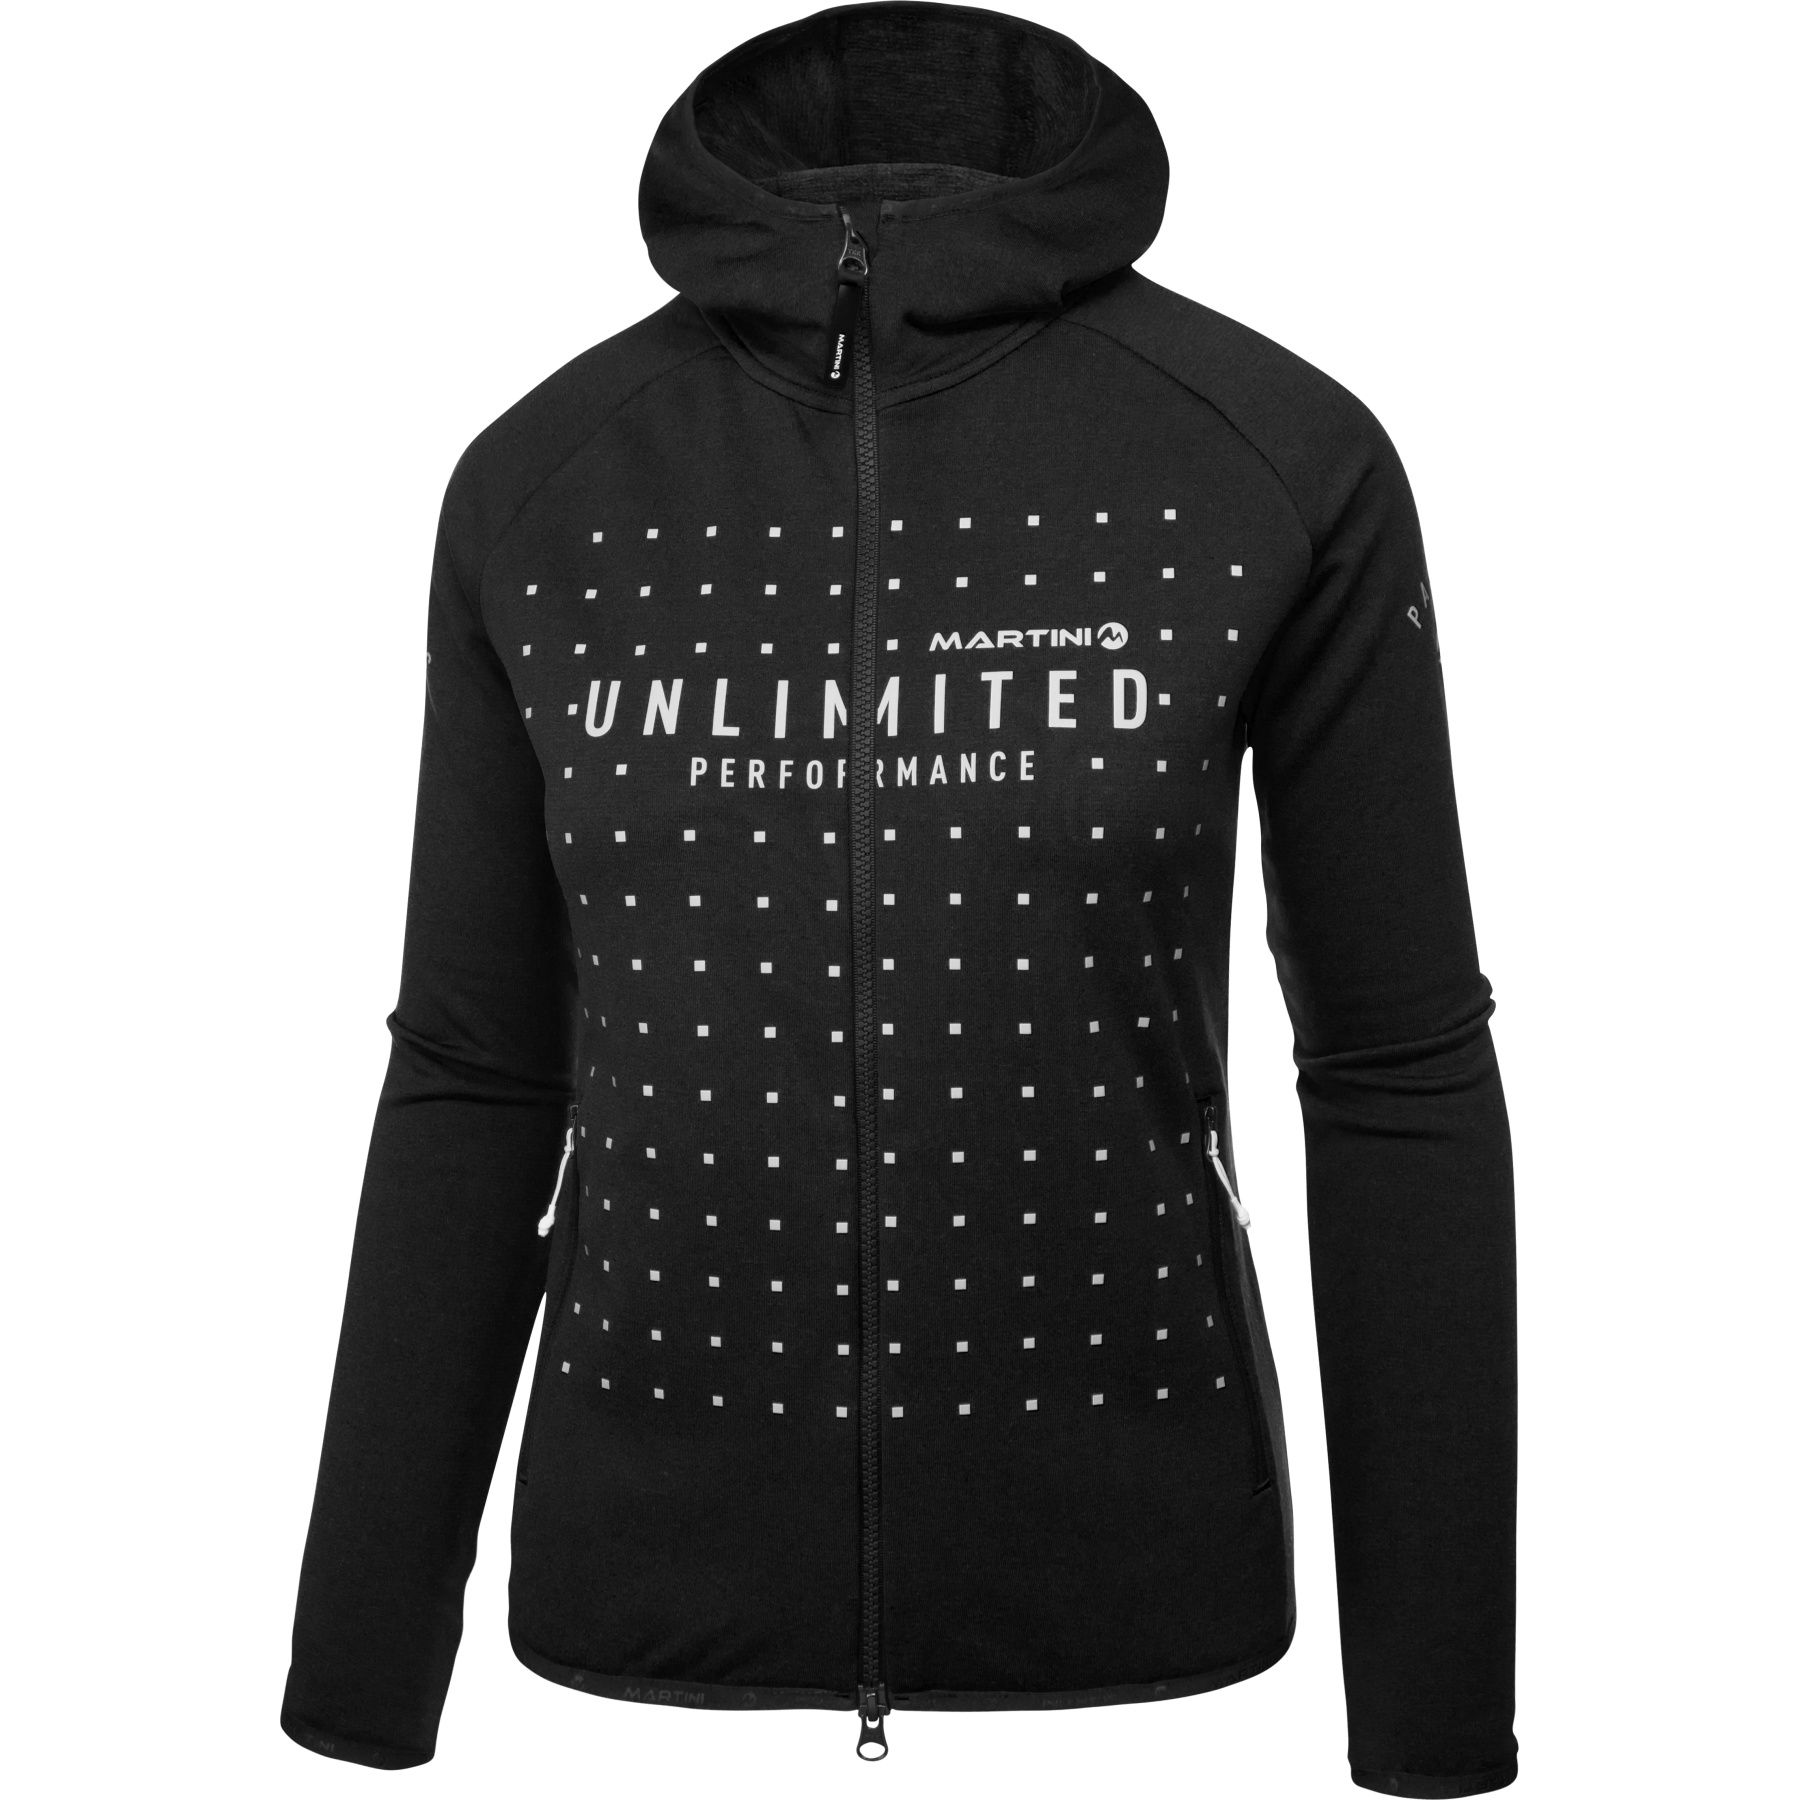 Picture of Martini Sportswear New Vision Jacket Women - black 1010